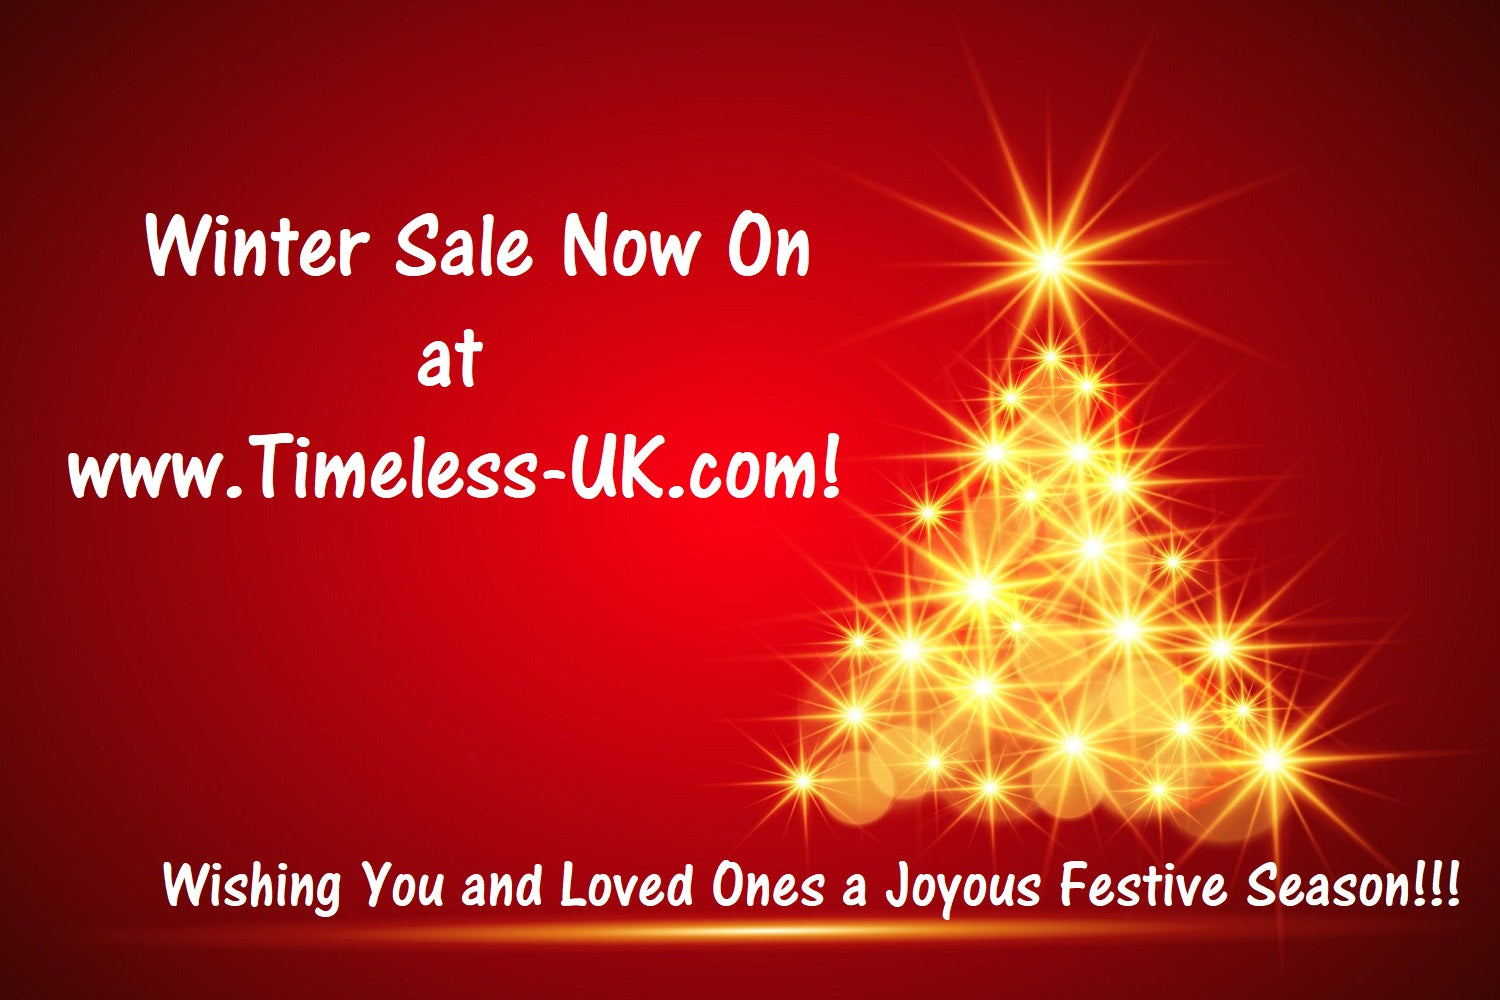 Winter Sale No On at www.timeless-uk.com with up to 50% off on Many brands including the New Colour-coded Timeless serums!